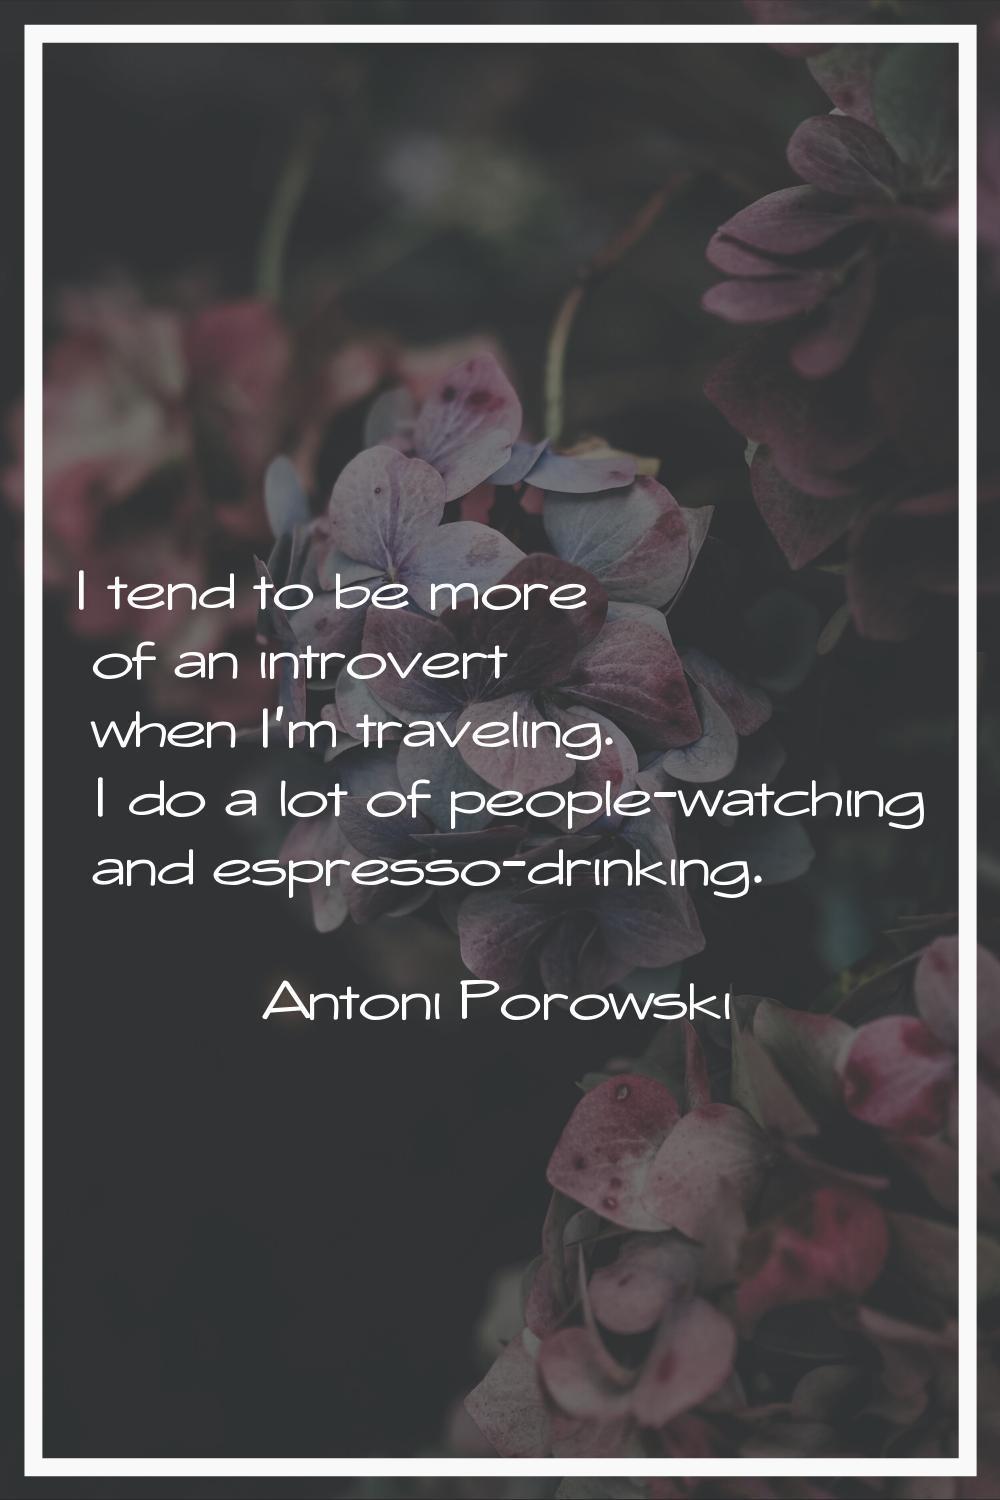 I tend to be more of an introvert when I'm traveling. I do a lot of people-watching and espresso-dr